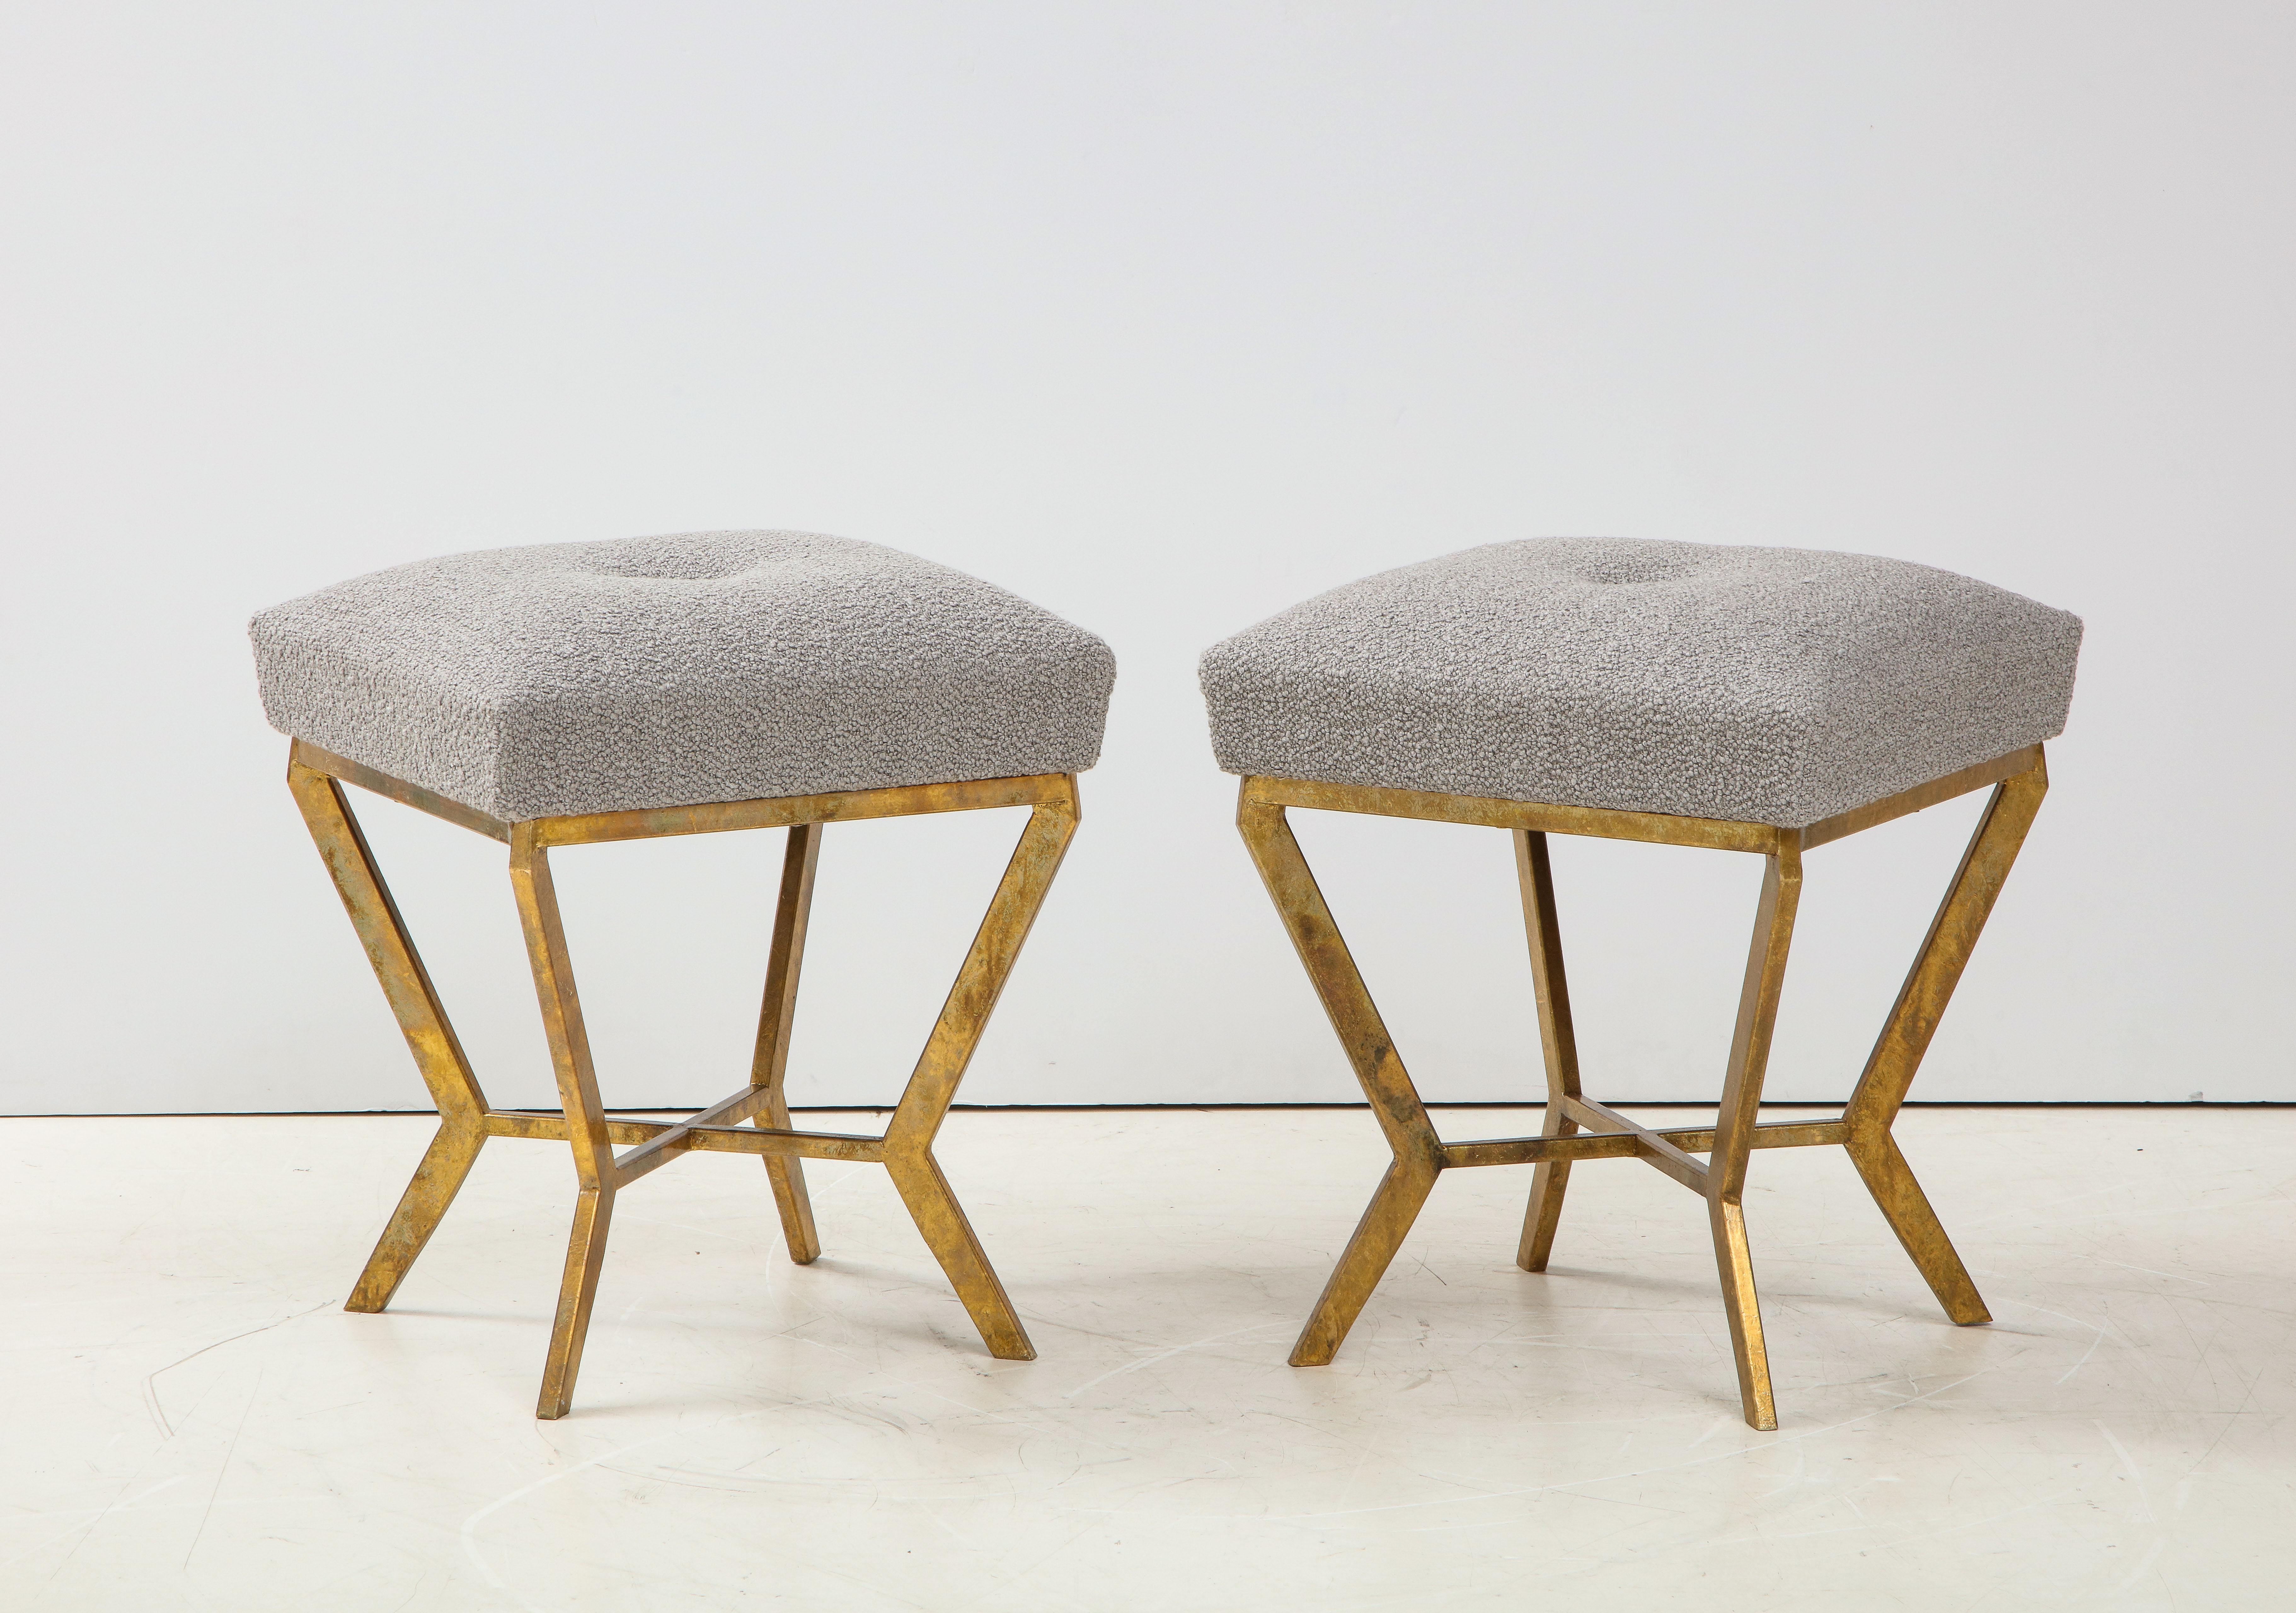 Pair of elegant iron stools hand-gilded with 24k gold leaf with a comfortable, one-button tufted seat upholstered in imported Grey tone boucle. Hand-made by master artisan in Florence, Italy. This pair of stools is on display at the Gallery at 200